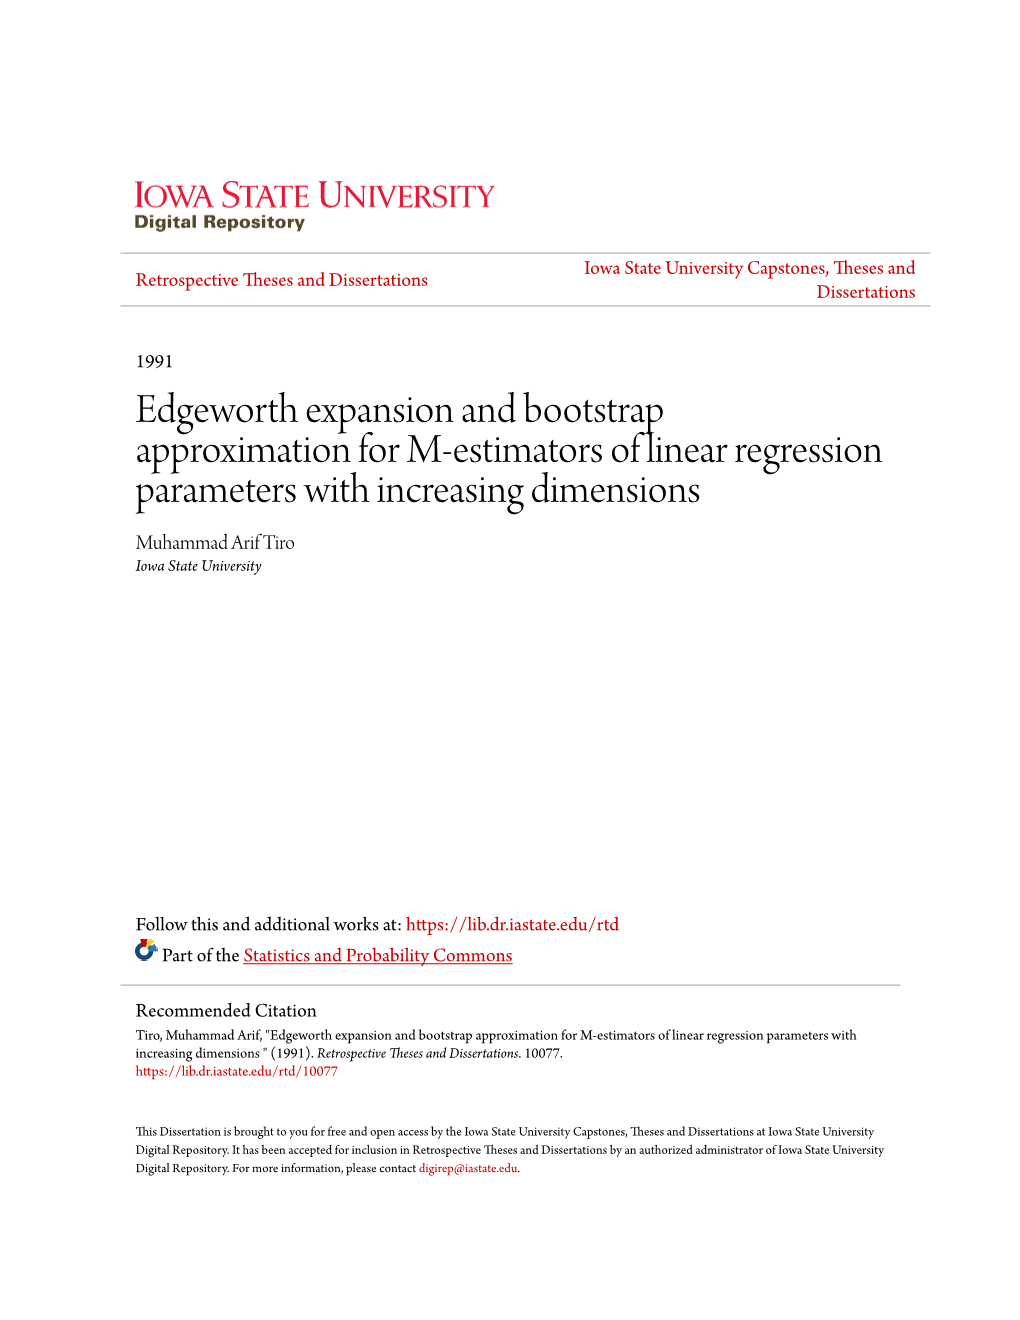 Edgeworth Expansion and Bootstrap Approximation for M-Estimators of Linear Regression Parameters with Increasing Dimensions Muhammad Arif Tiro Iowa State University